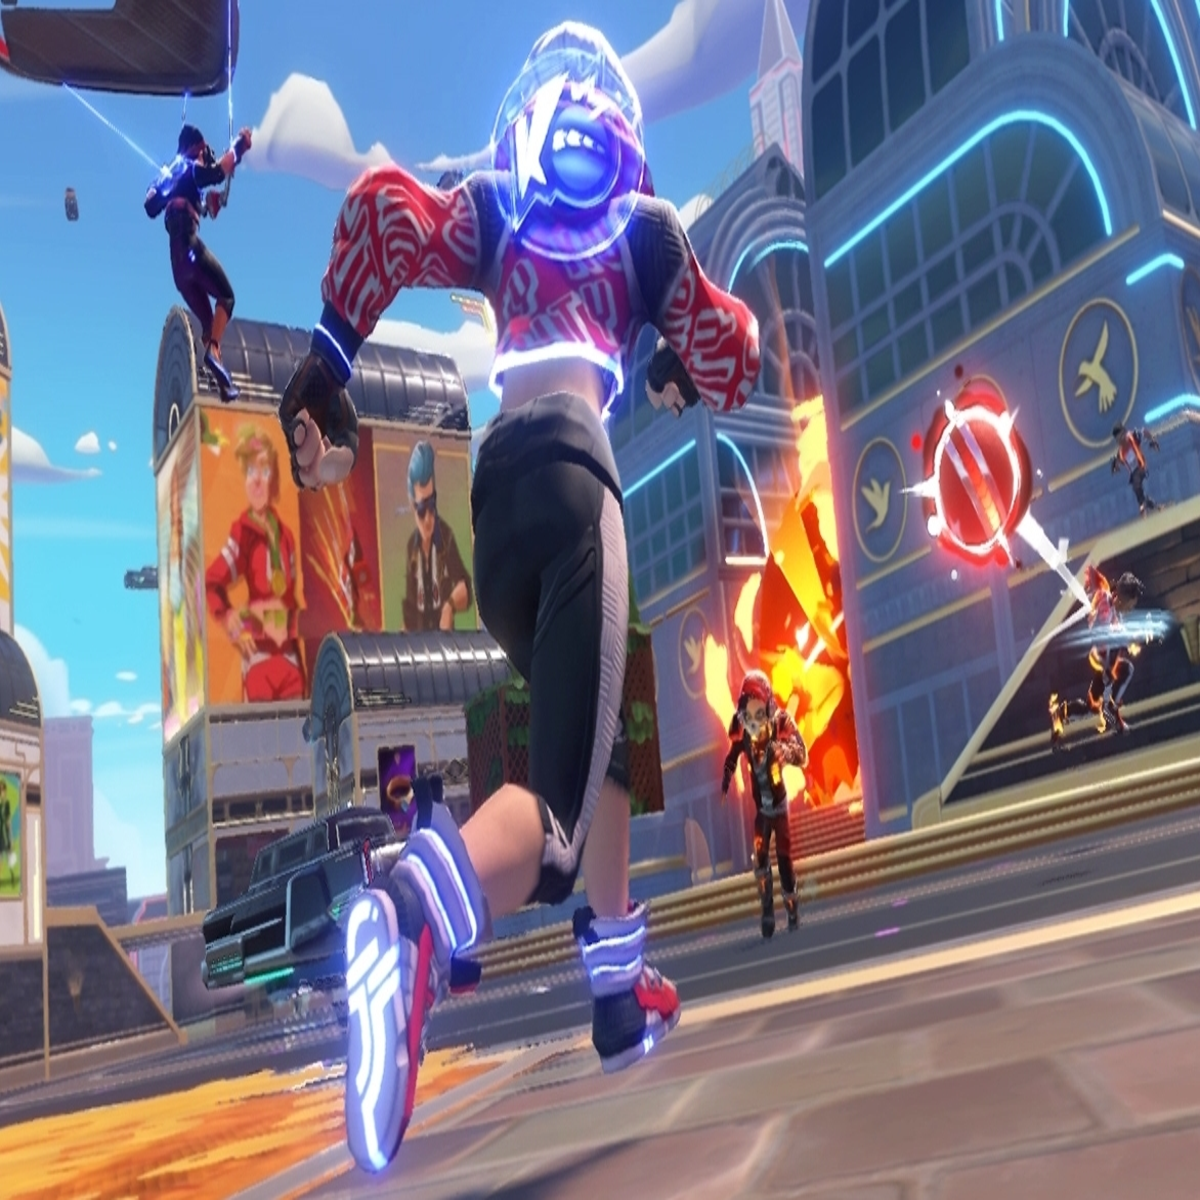 Fun dodgebrawler Knockout City is now officially free-to-play